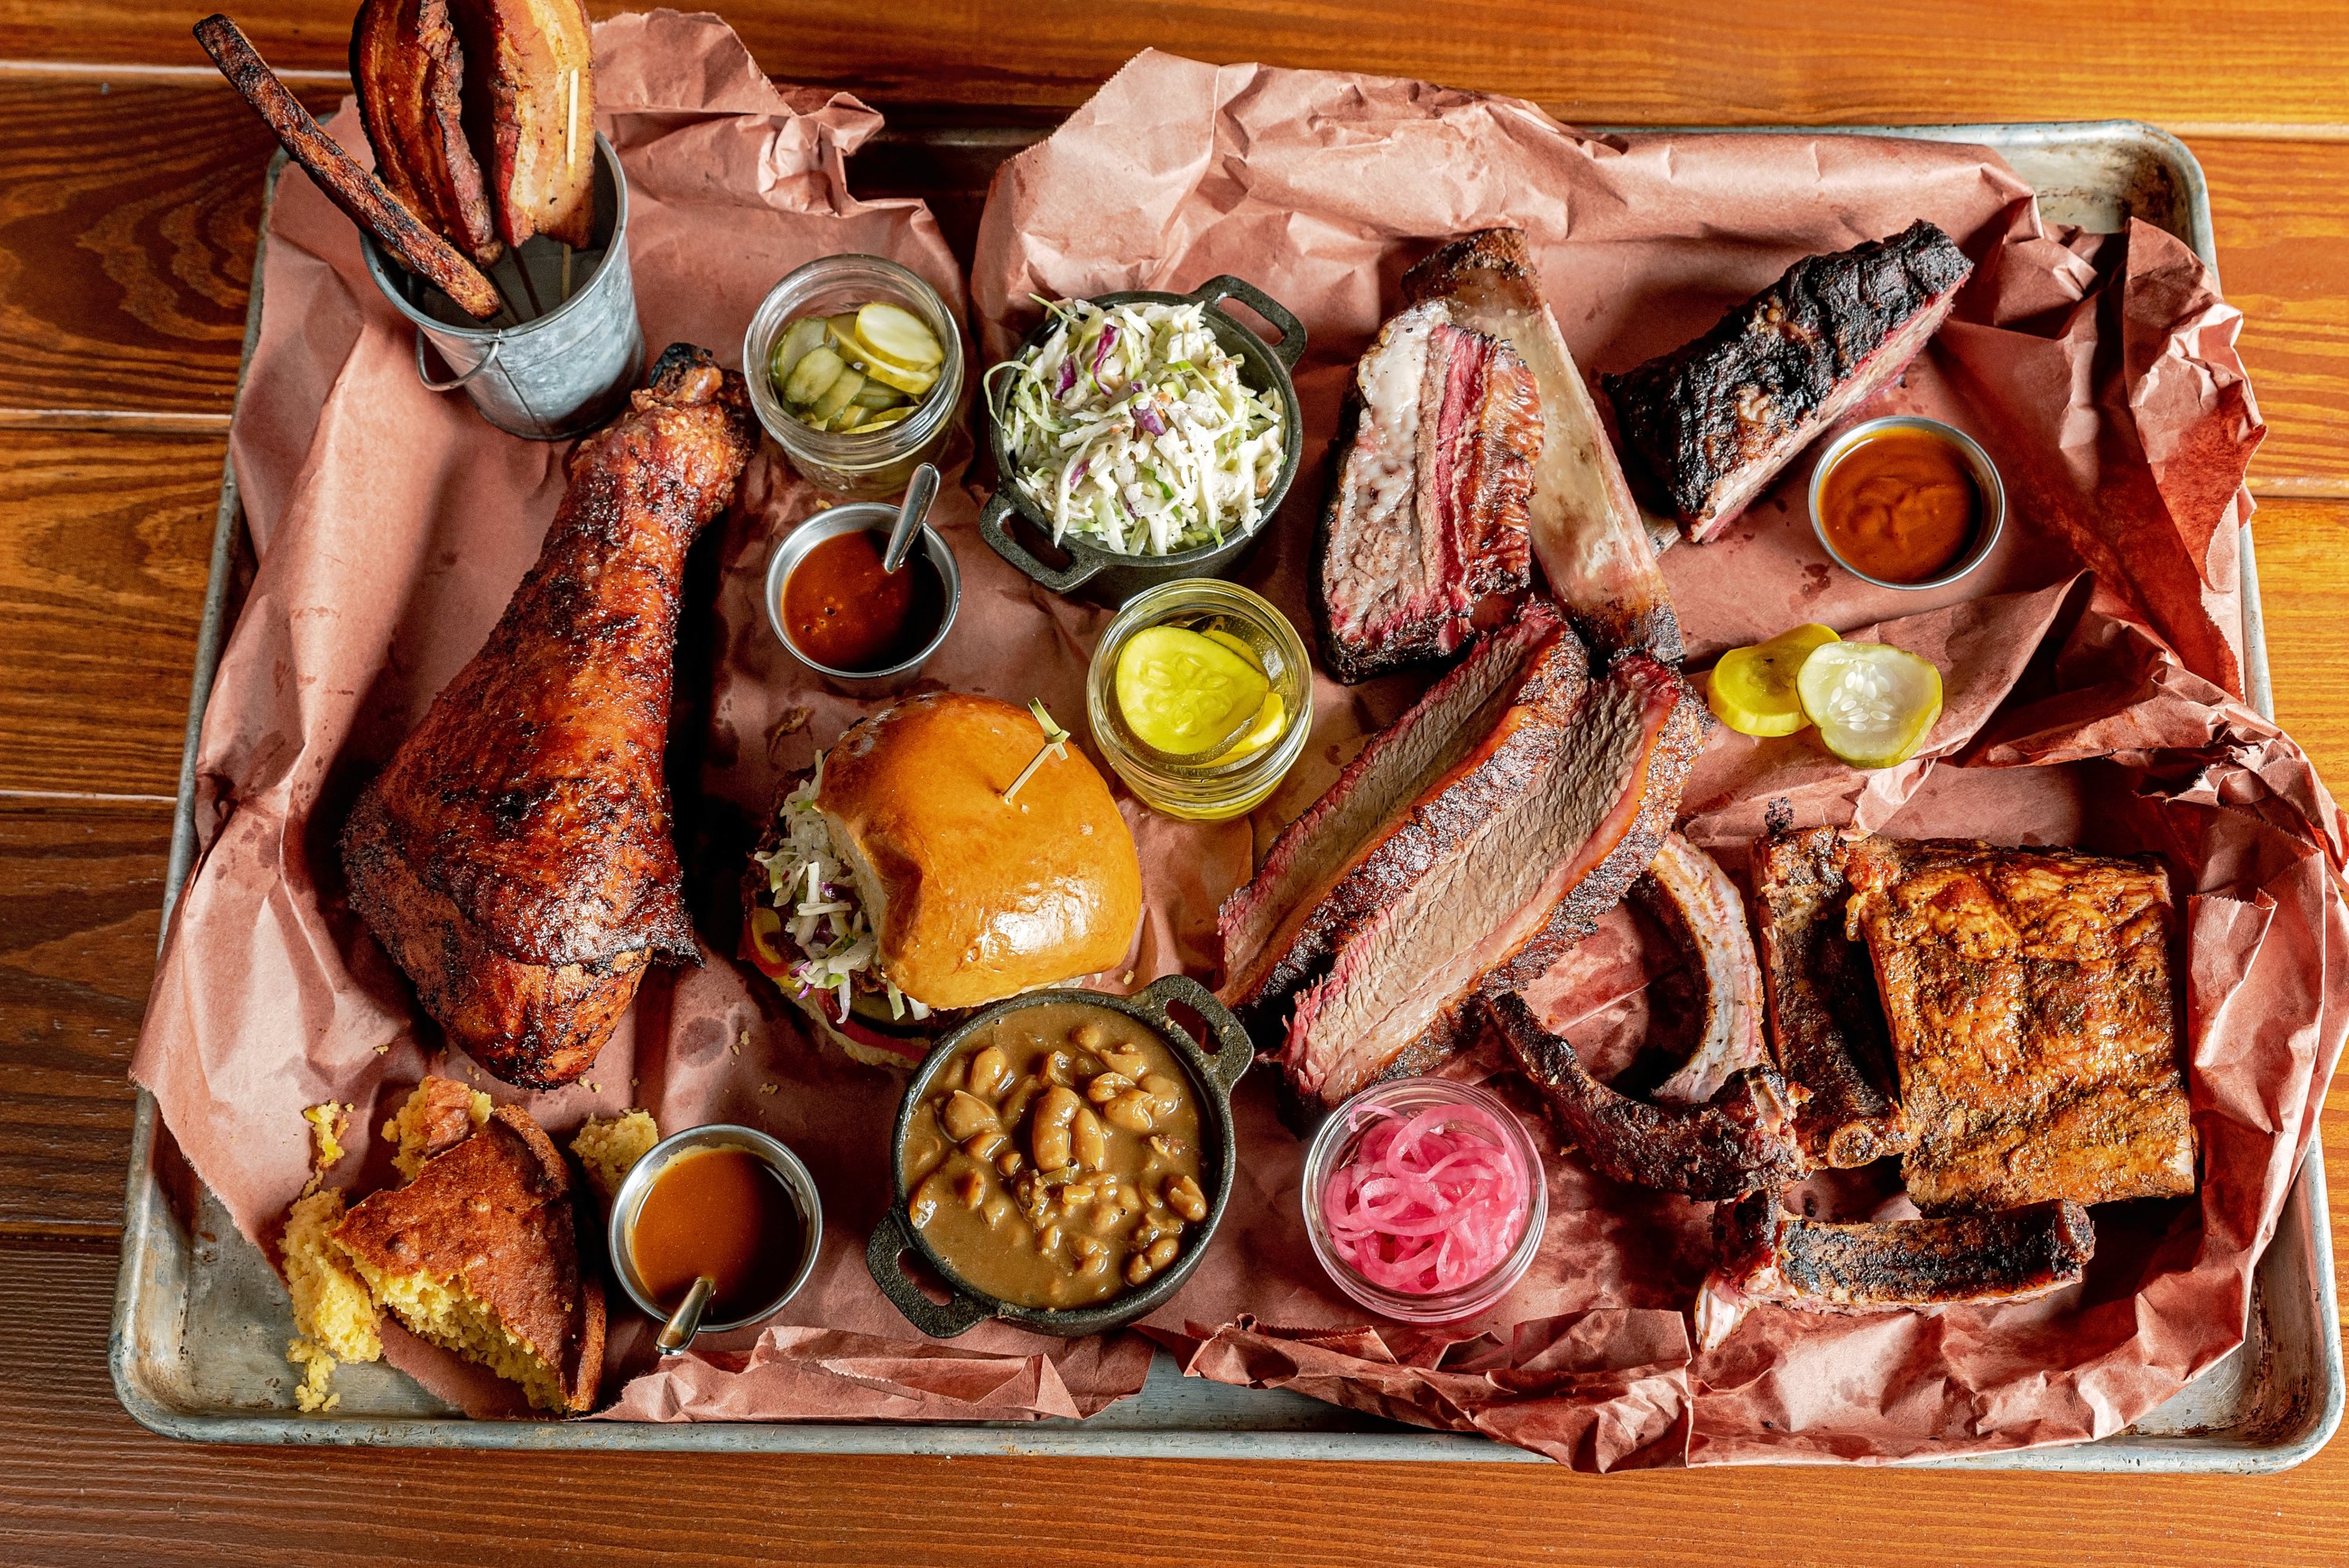 Money Muscle BBQ's platter includes brisket and pulled pork. Photo courtesy of Money Muscle BBQ.